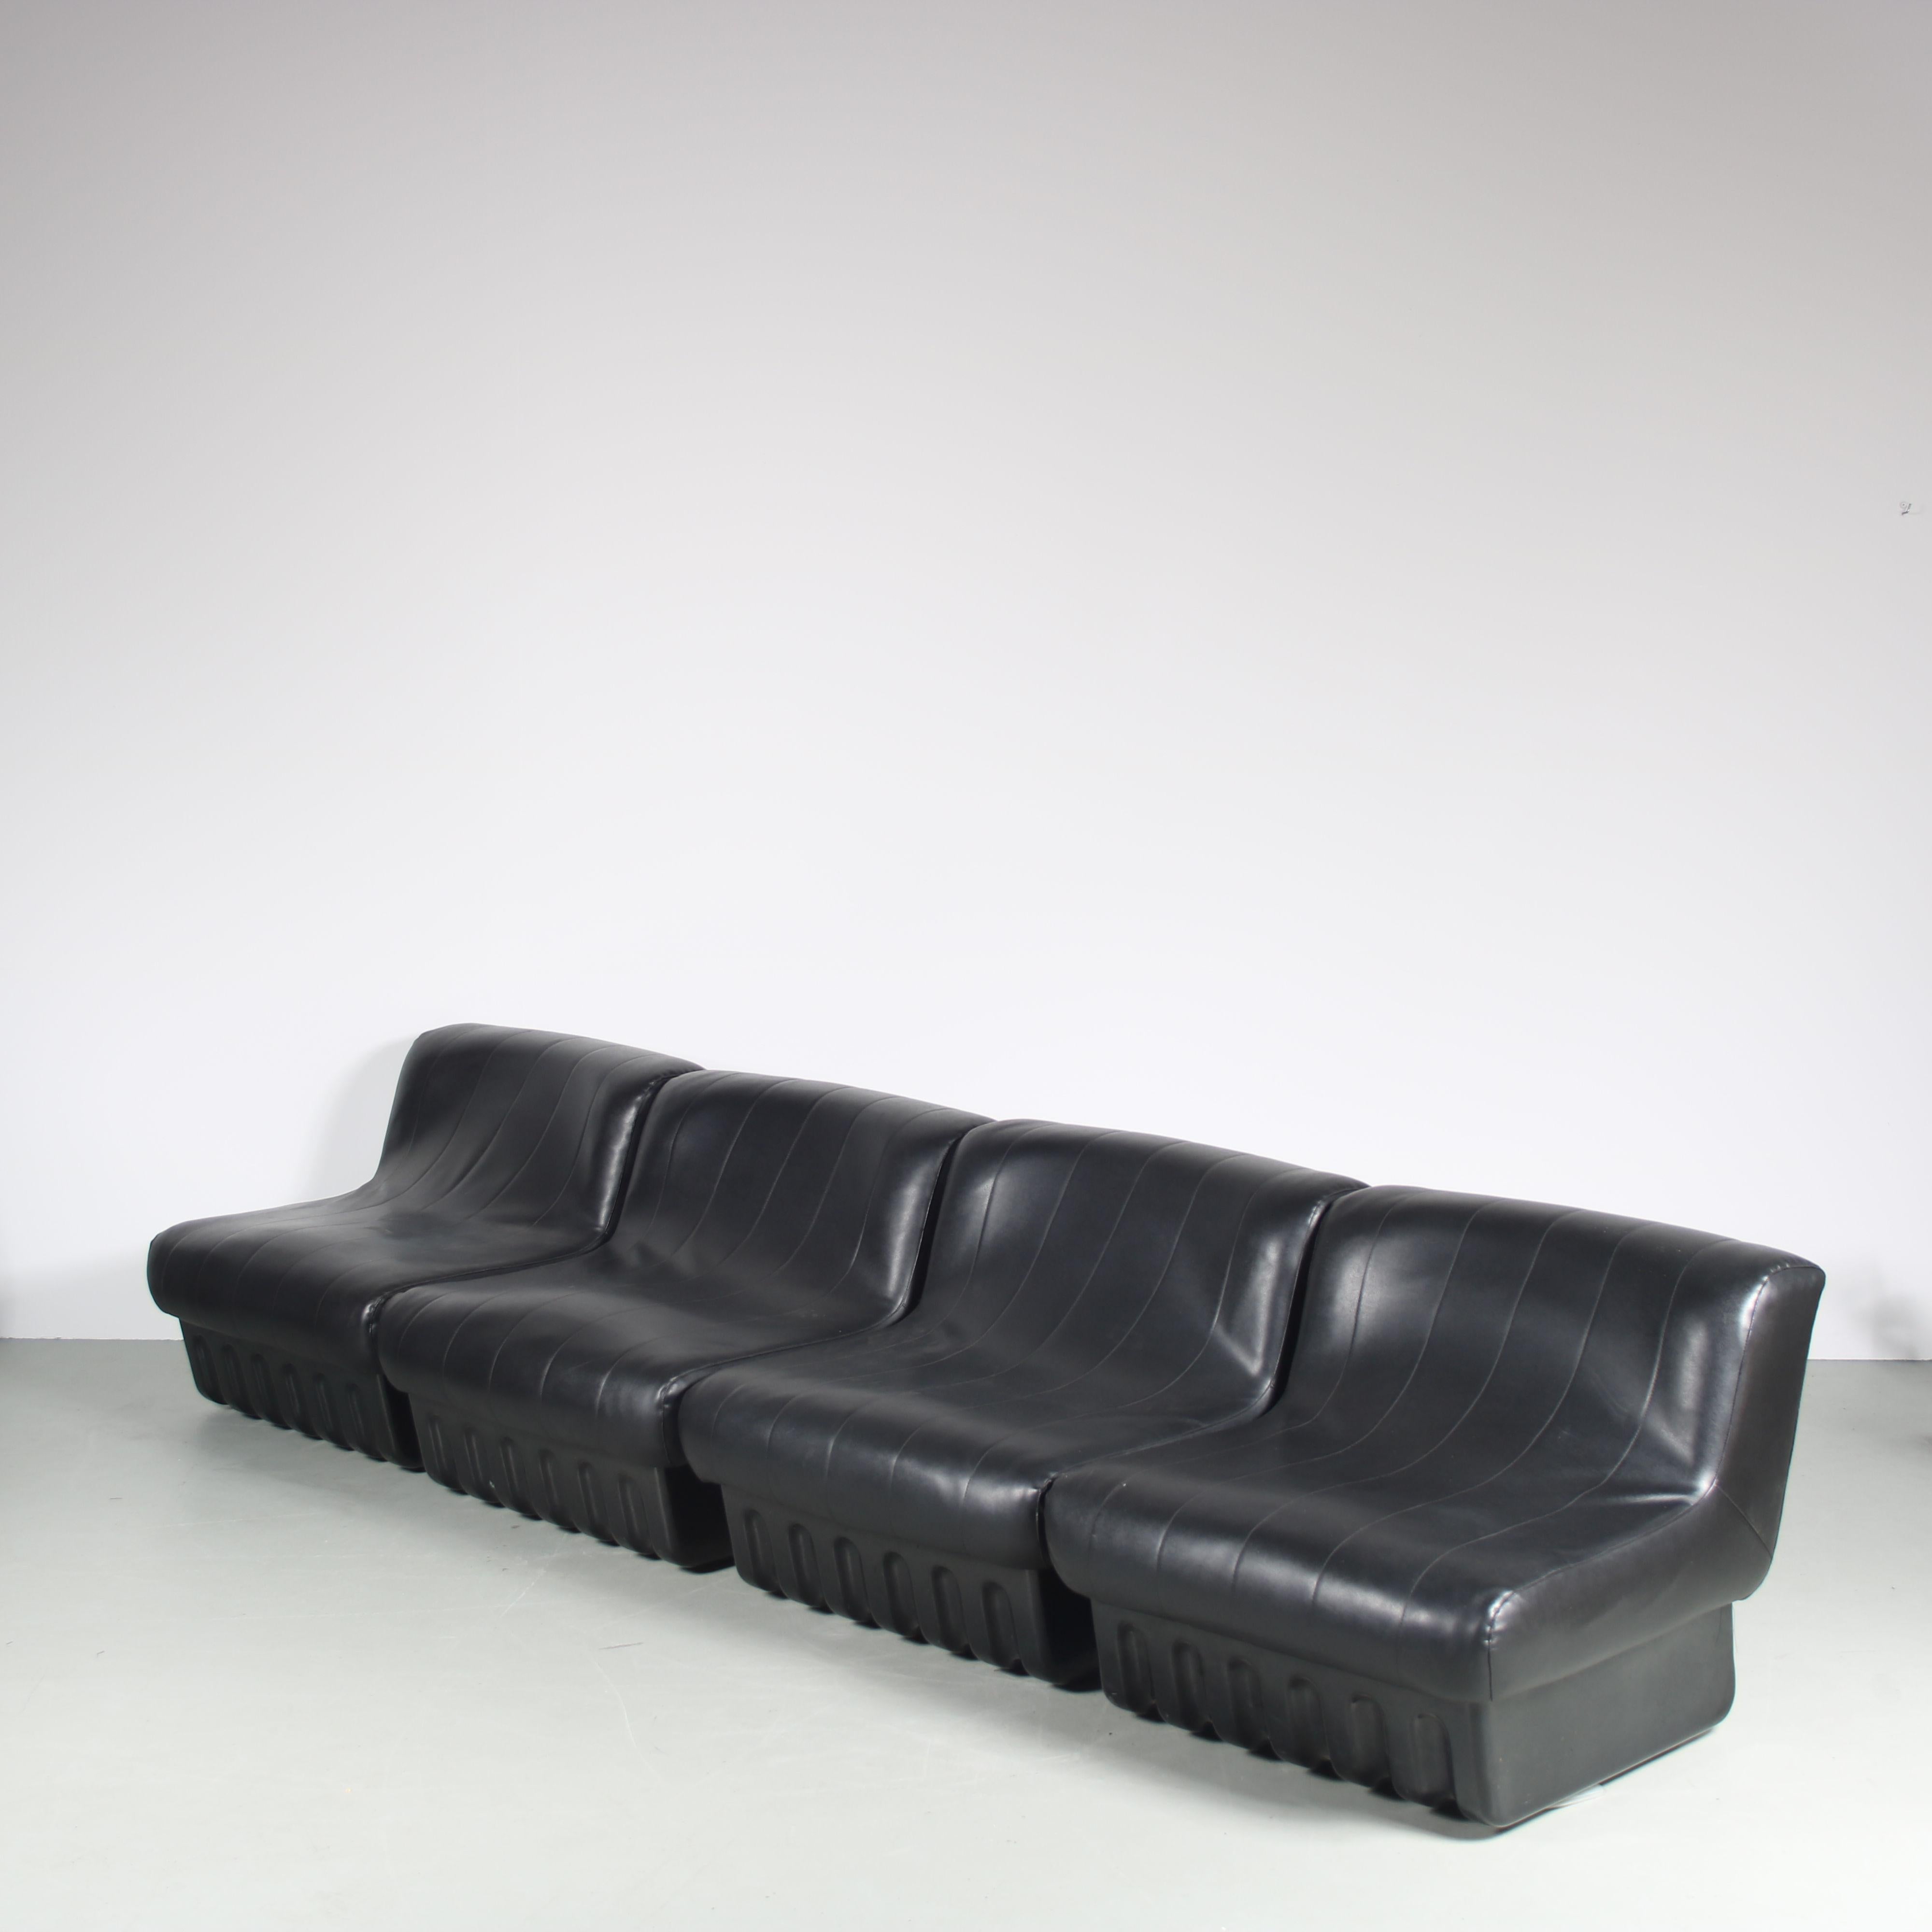 An eye-catching set of four rare seating / sofa elements designed by Masonari Umeda and manufactured by Formapin, Italy around 1960.

Each element has a black plastic base with unique shape, holding a thick seat that is upholstered in black skai